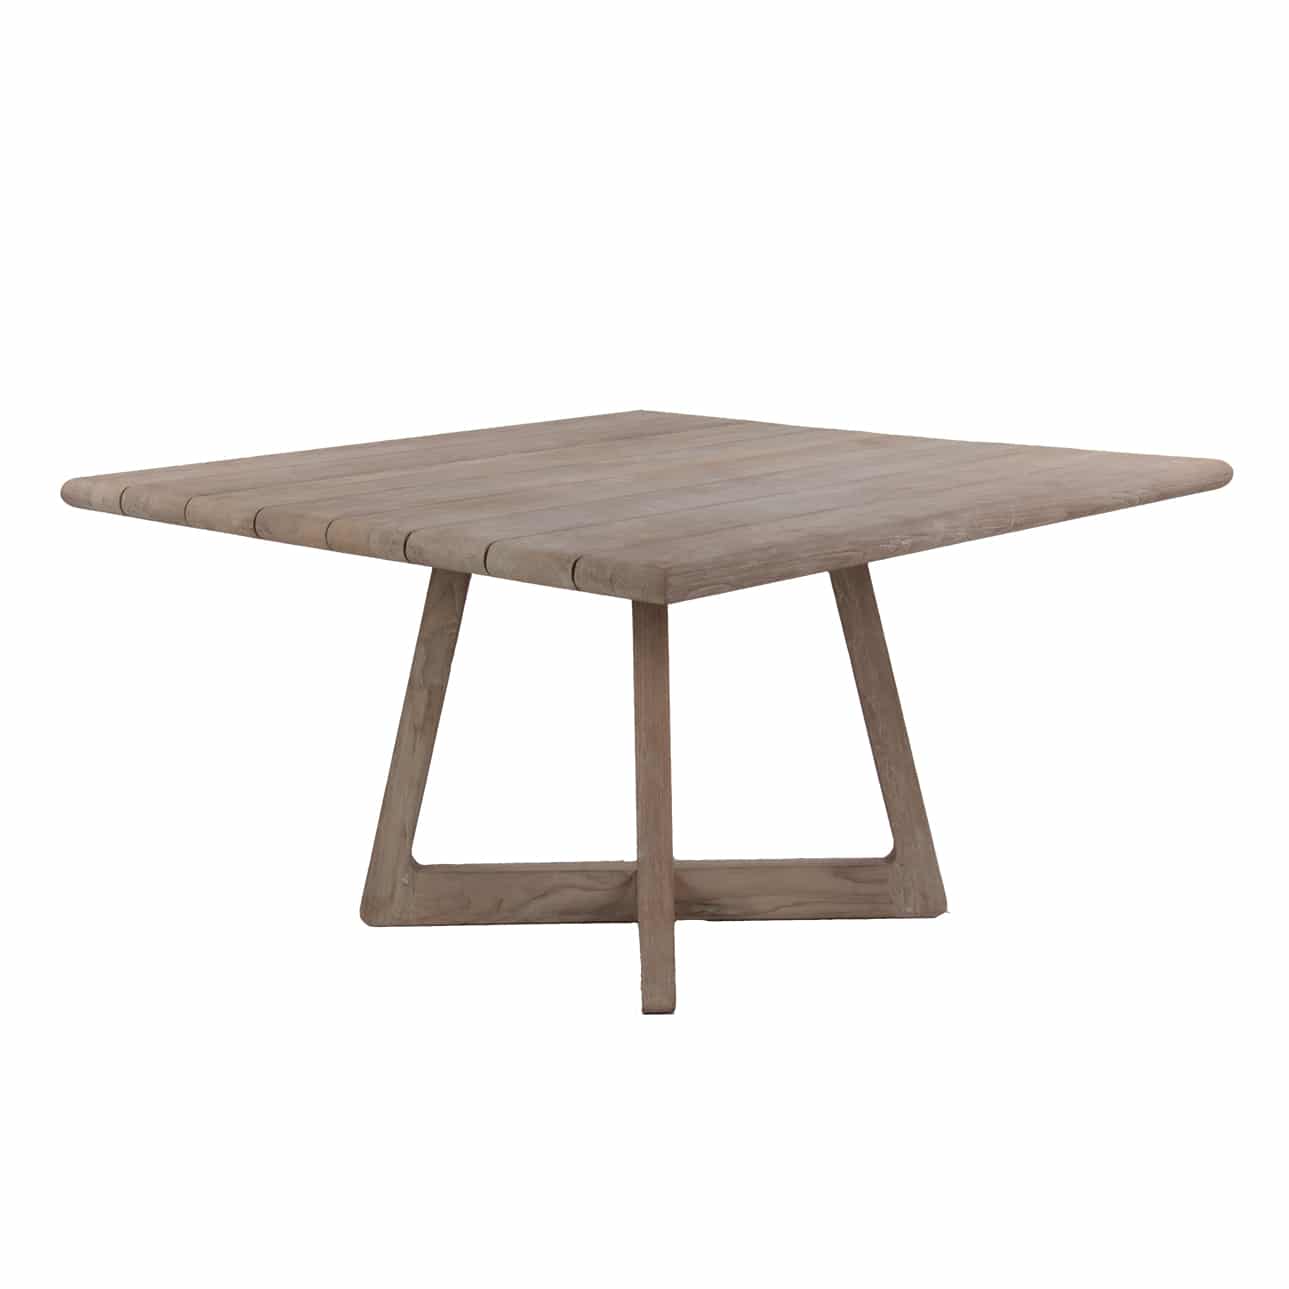 Tyber Reclaimed Teak Square Dining Table